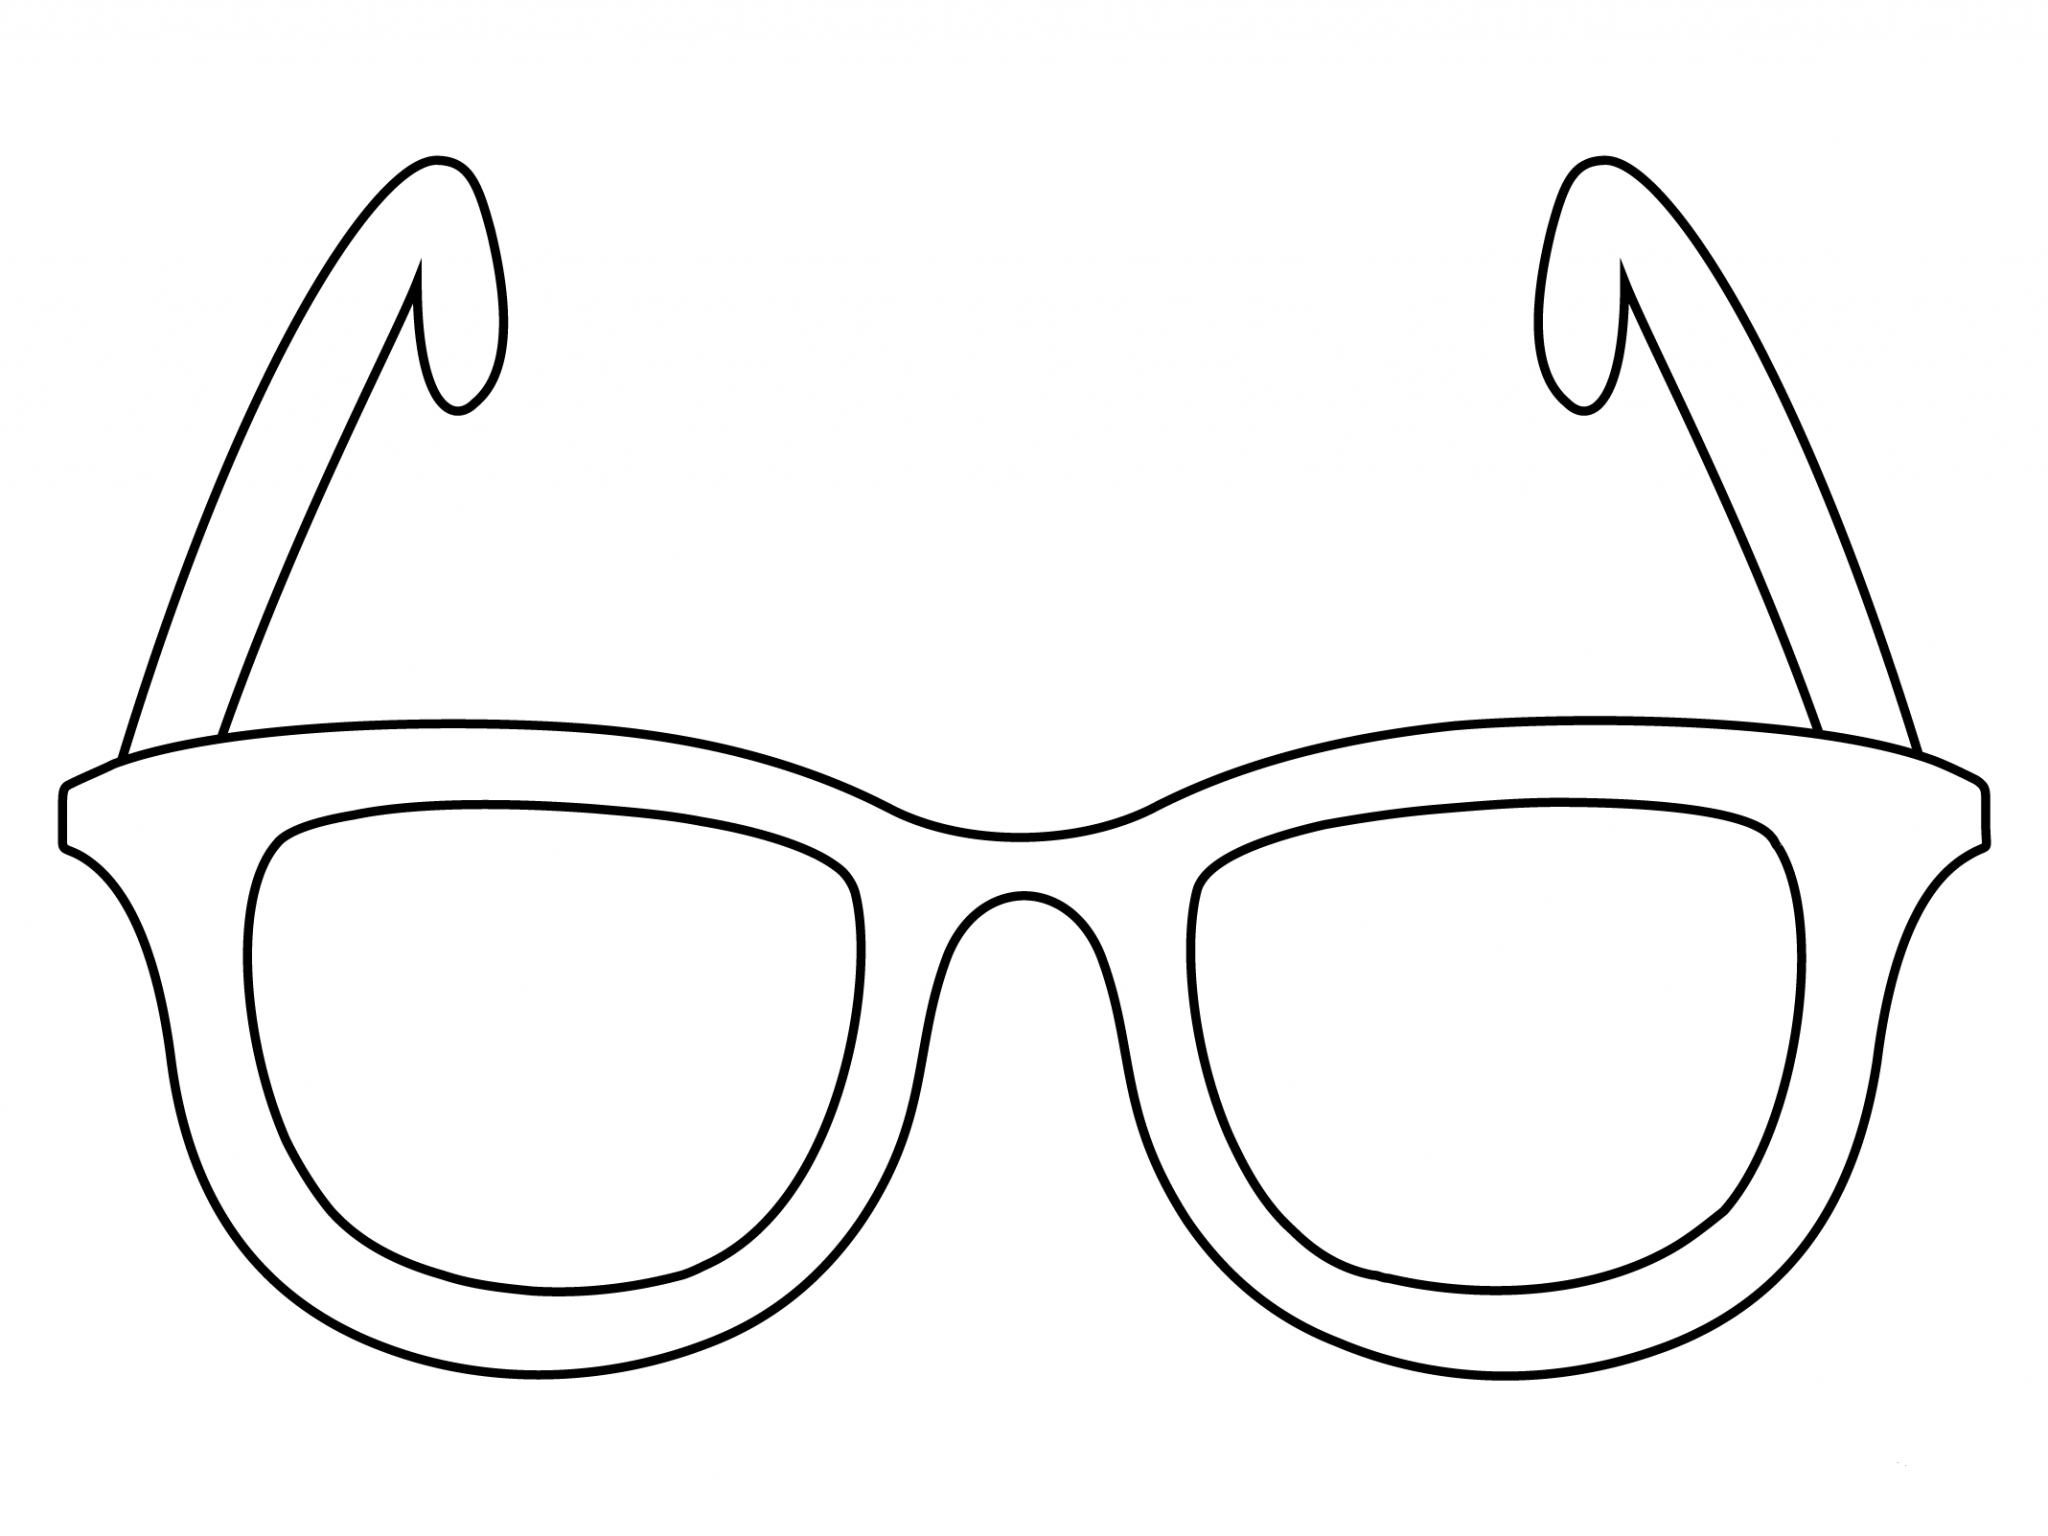 Sunglasses coloring page - ColouringPages